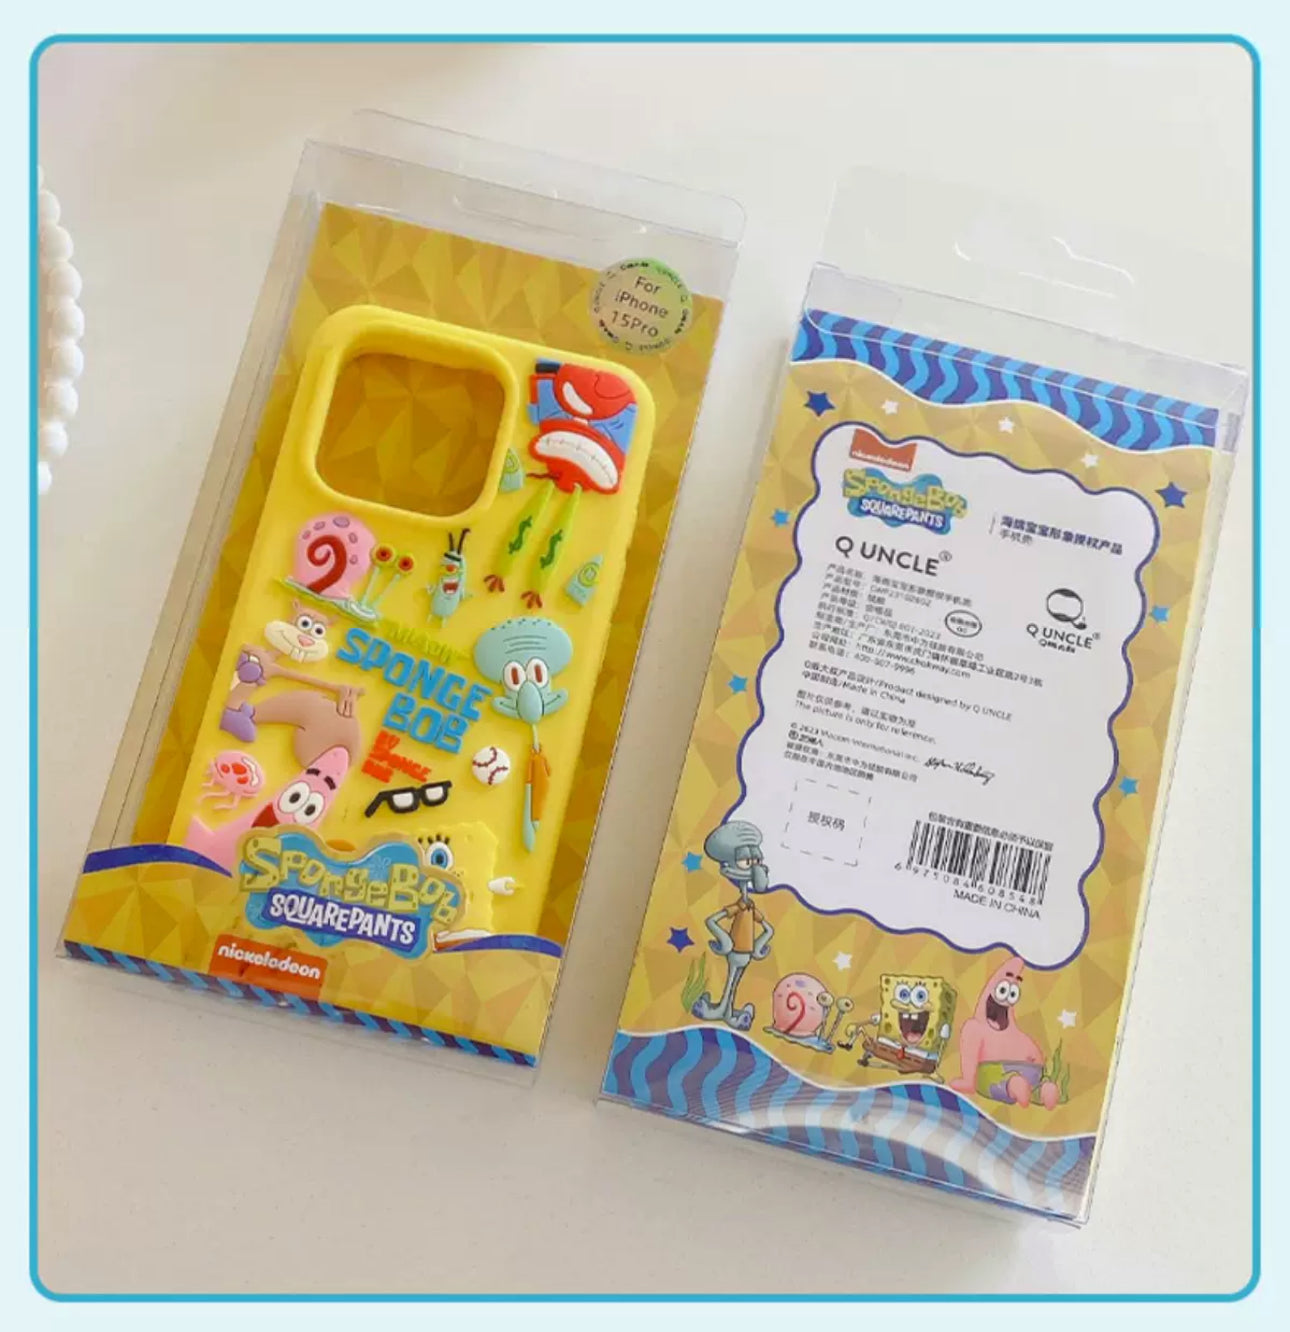 Cartoon Silicone Spongebob Patrick Star with friends Pink Yellow Sea Monster - iPhone Case 15 14 13 Pro ProMax